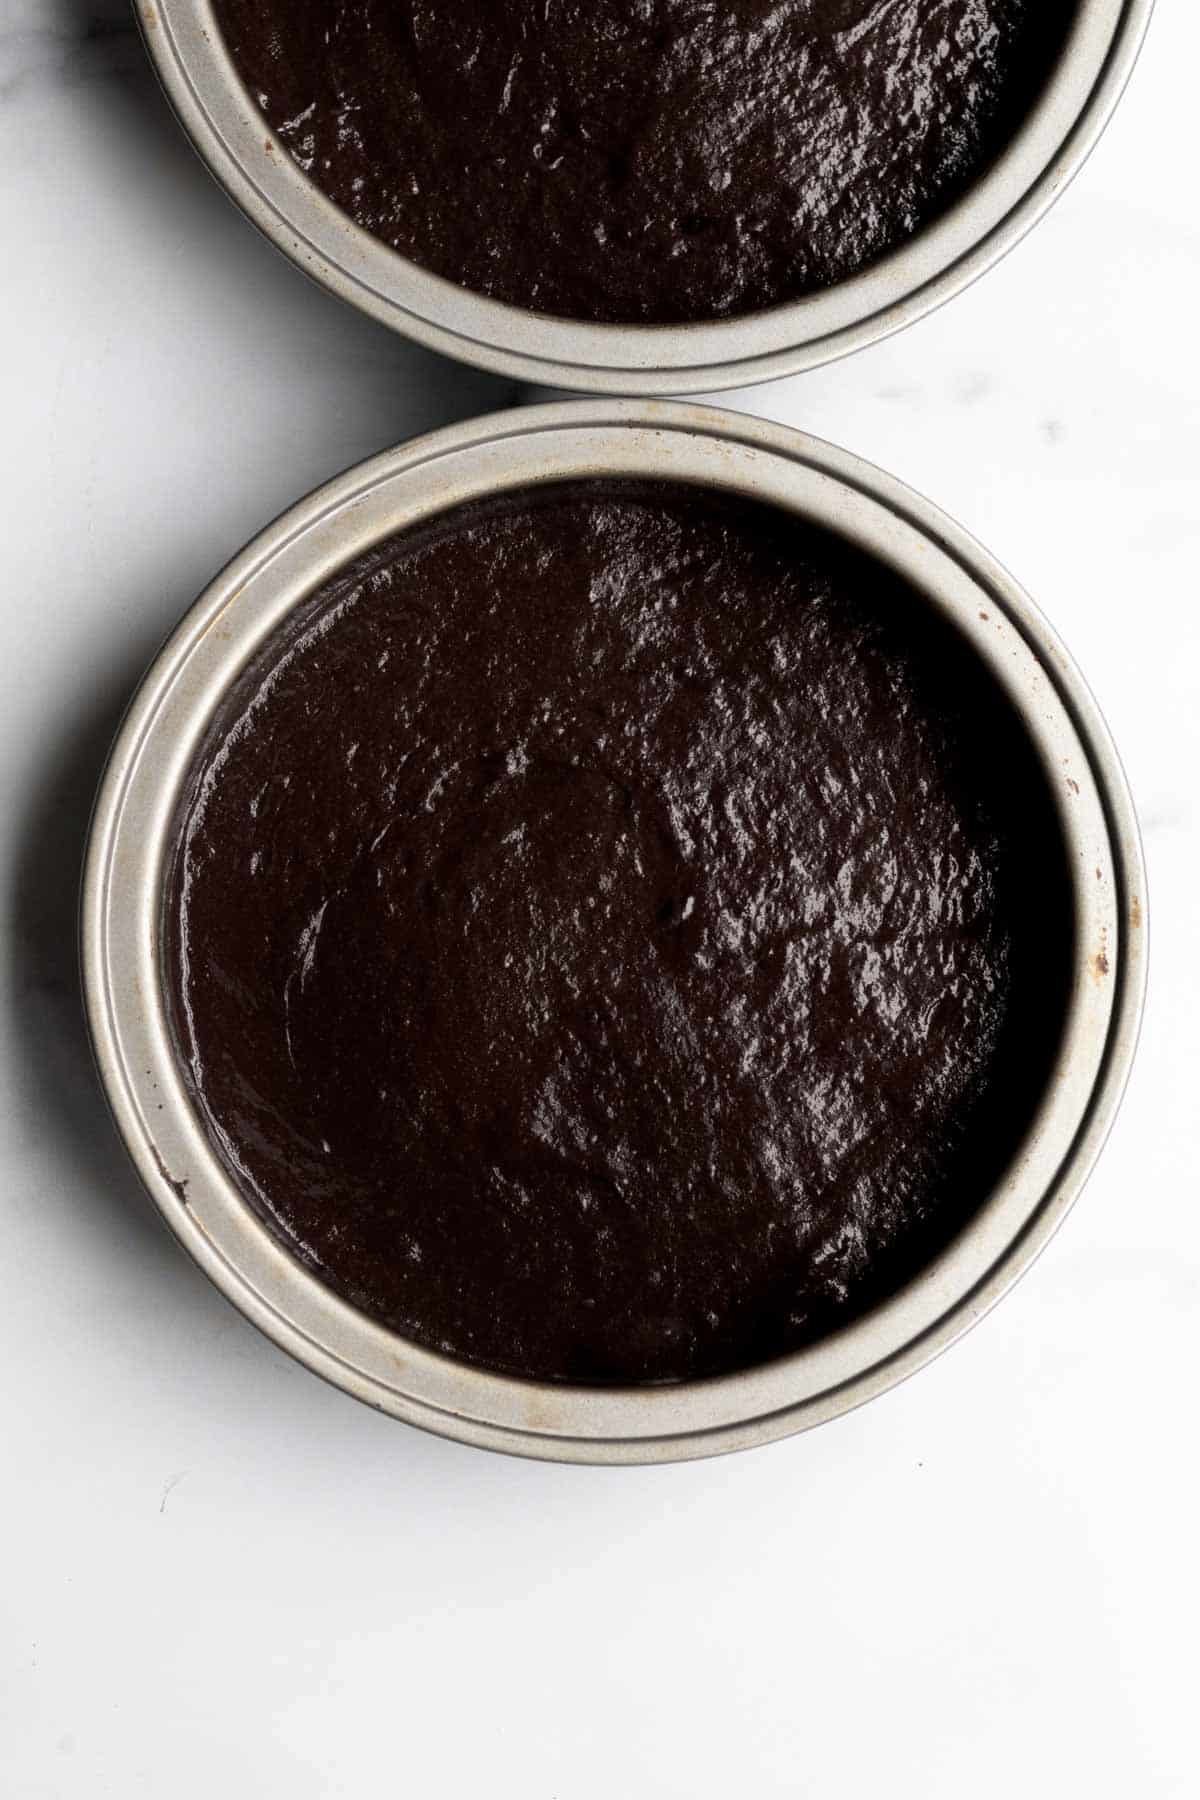 Rich chocolate cake batter in cake pans.